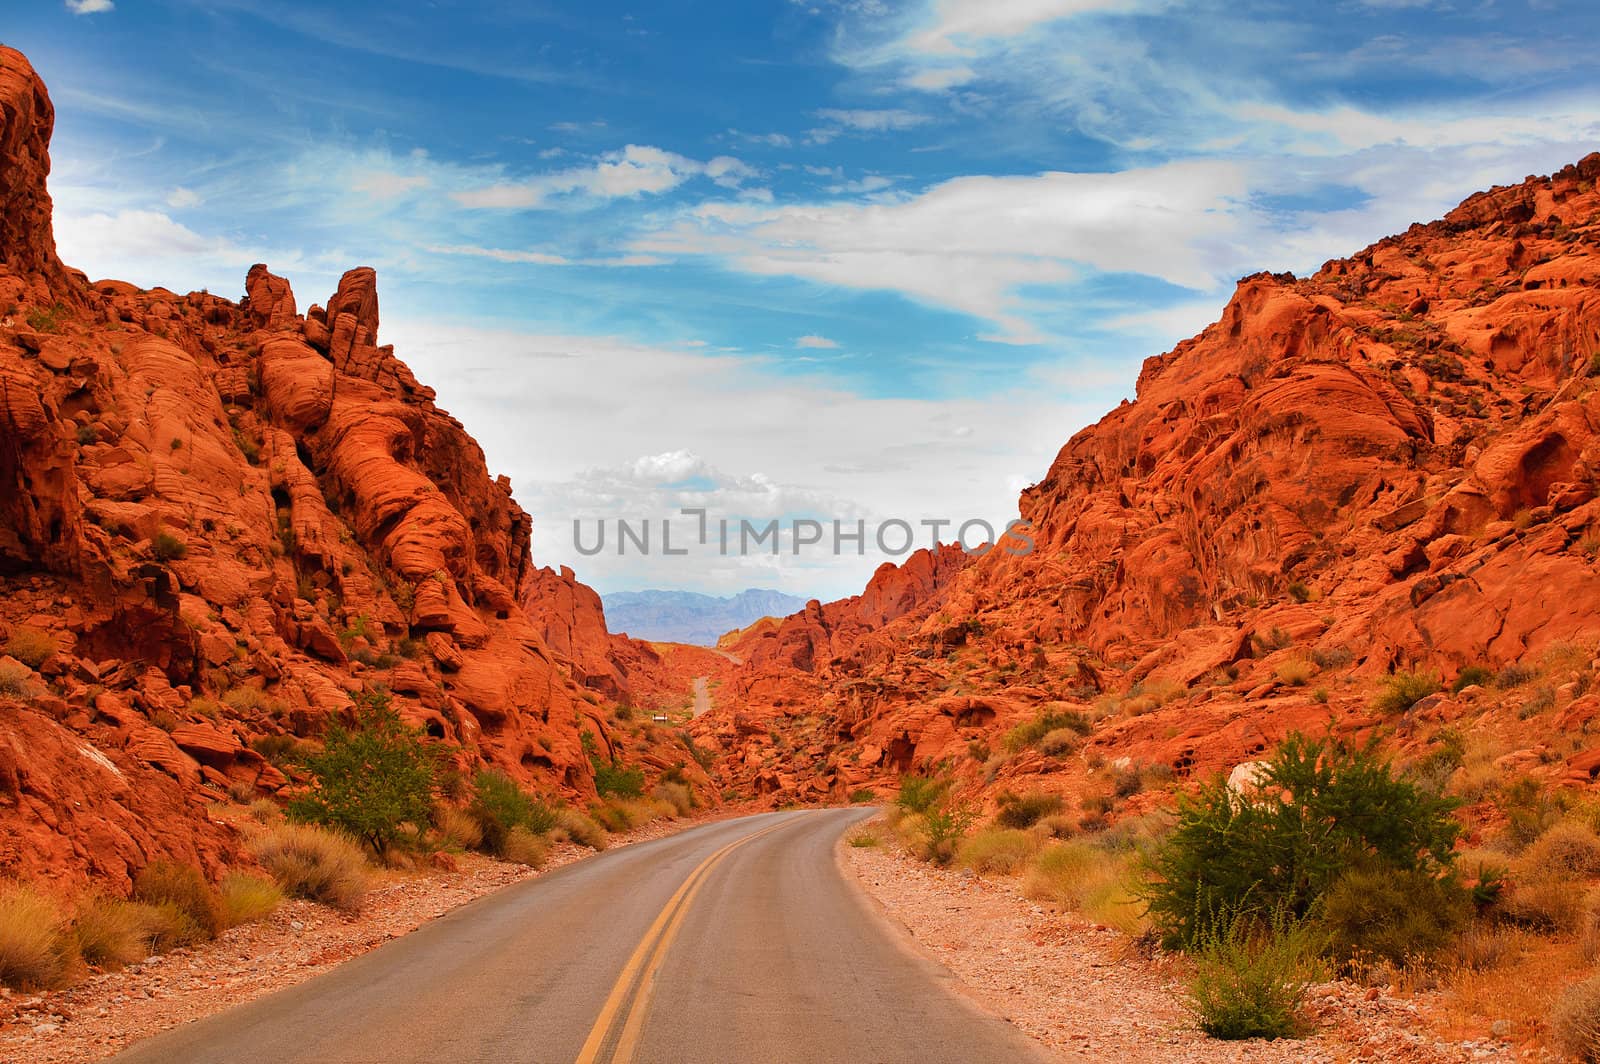 Scenic views along the road through the State park "Valley of Fire" in Nevada